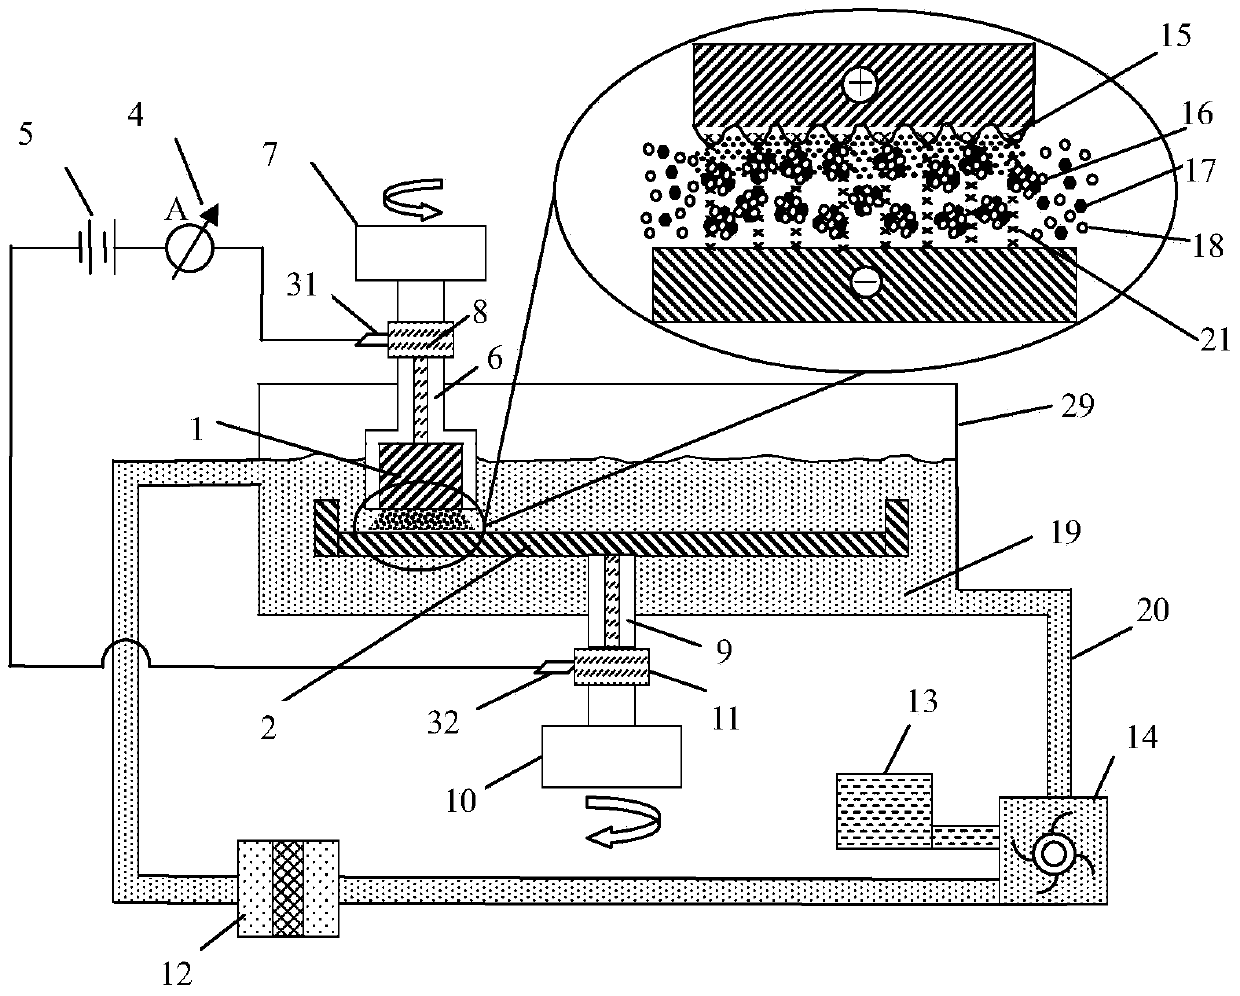 Ultra-precision machining device based on non-Newtonian fluid shear thickening and electrolysis composition effect